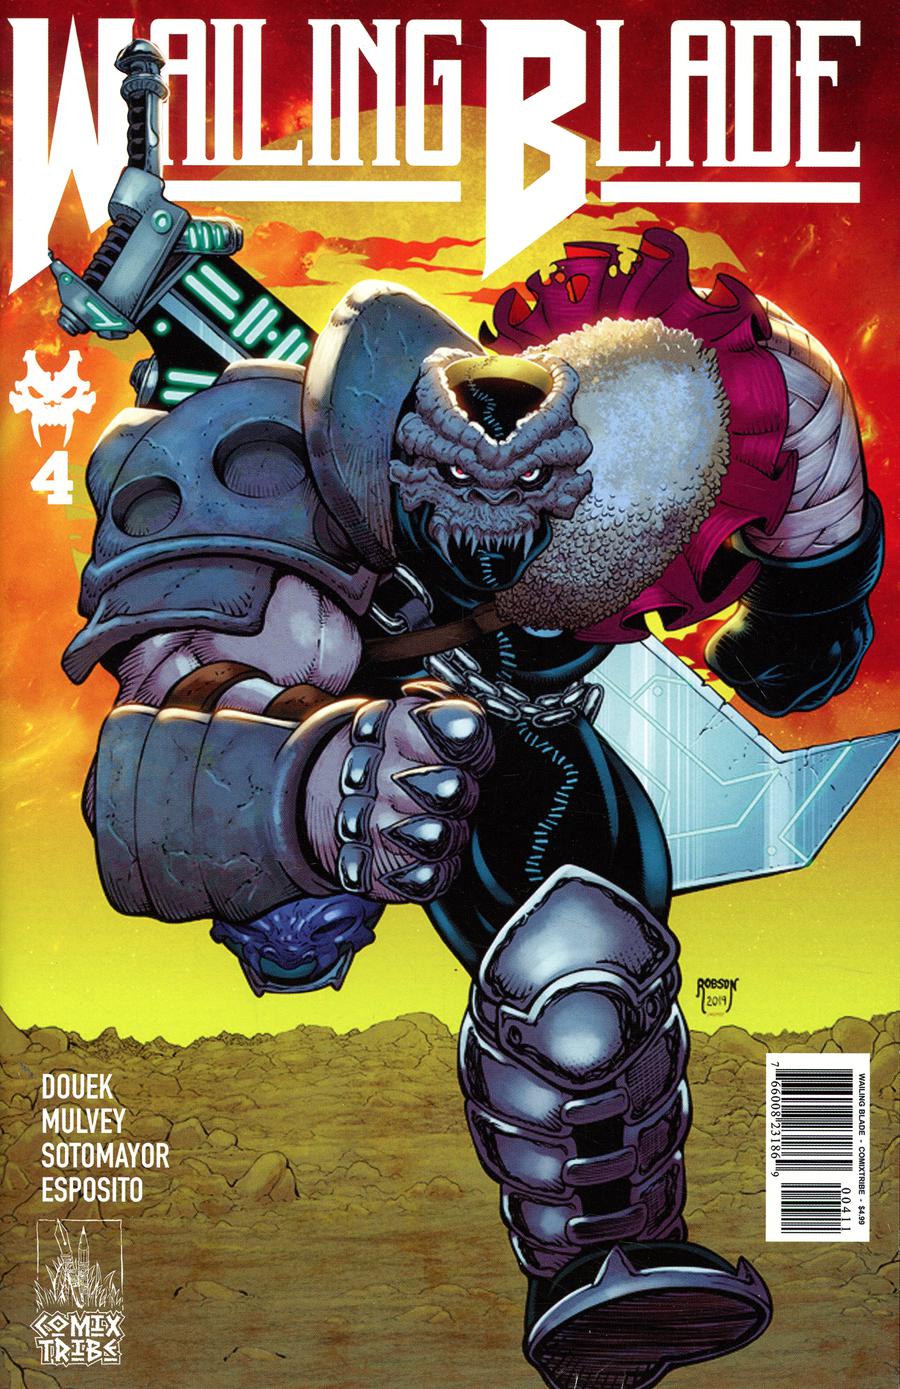 Wailing Blade #4 Cover B Will Robson